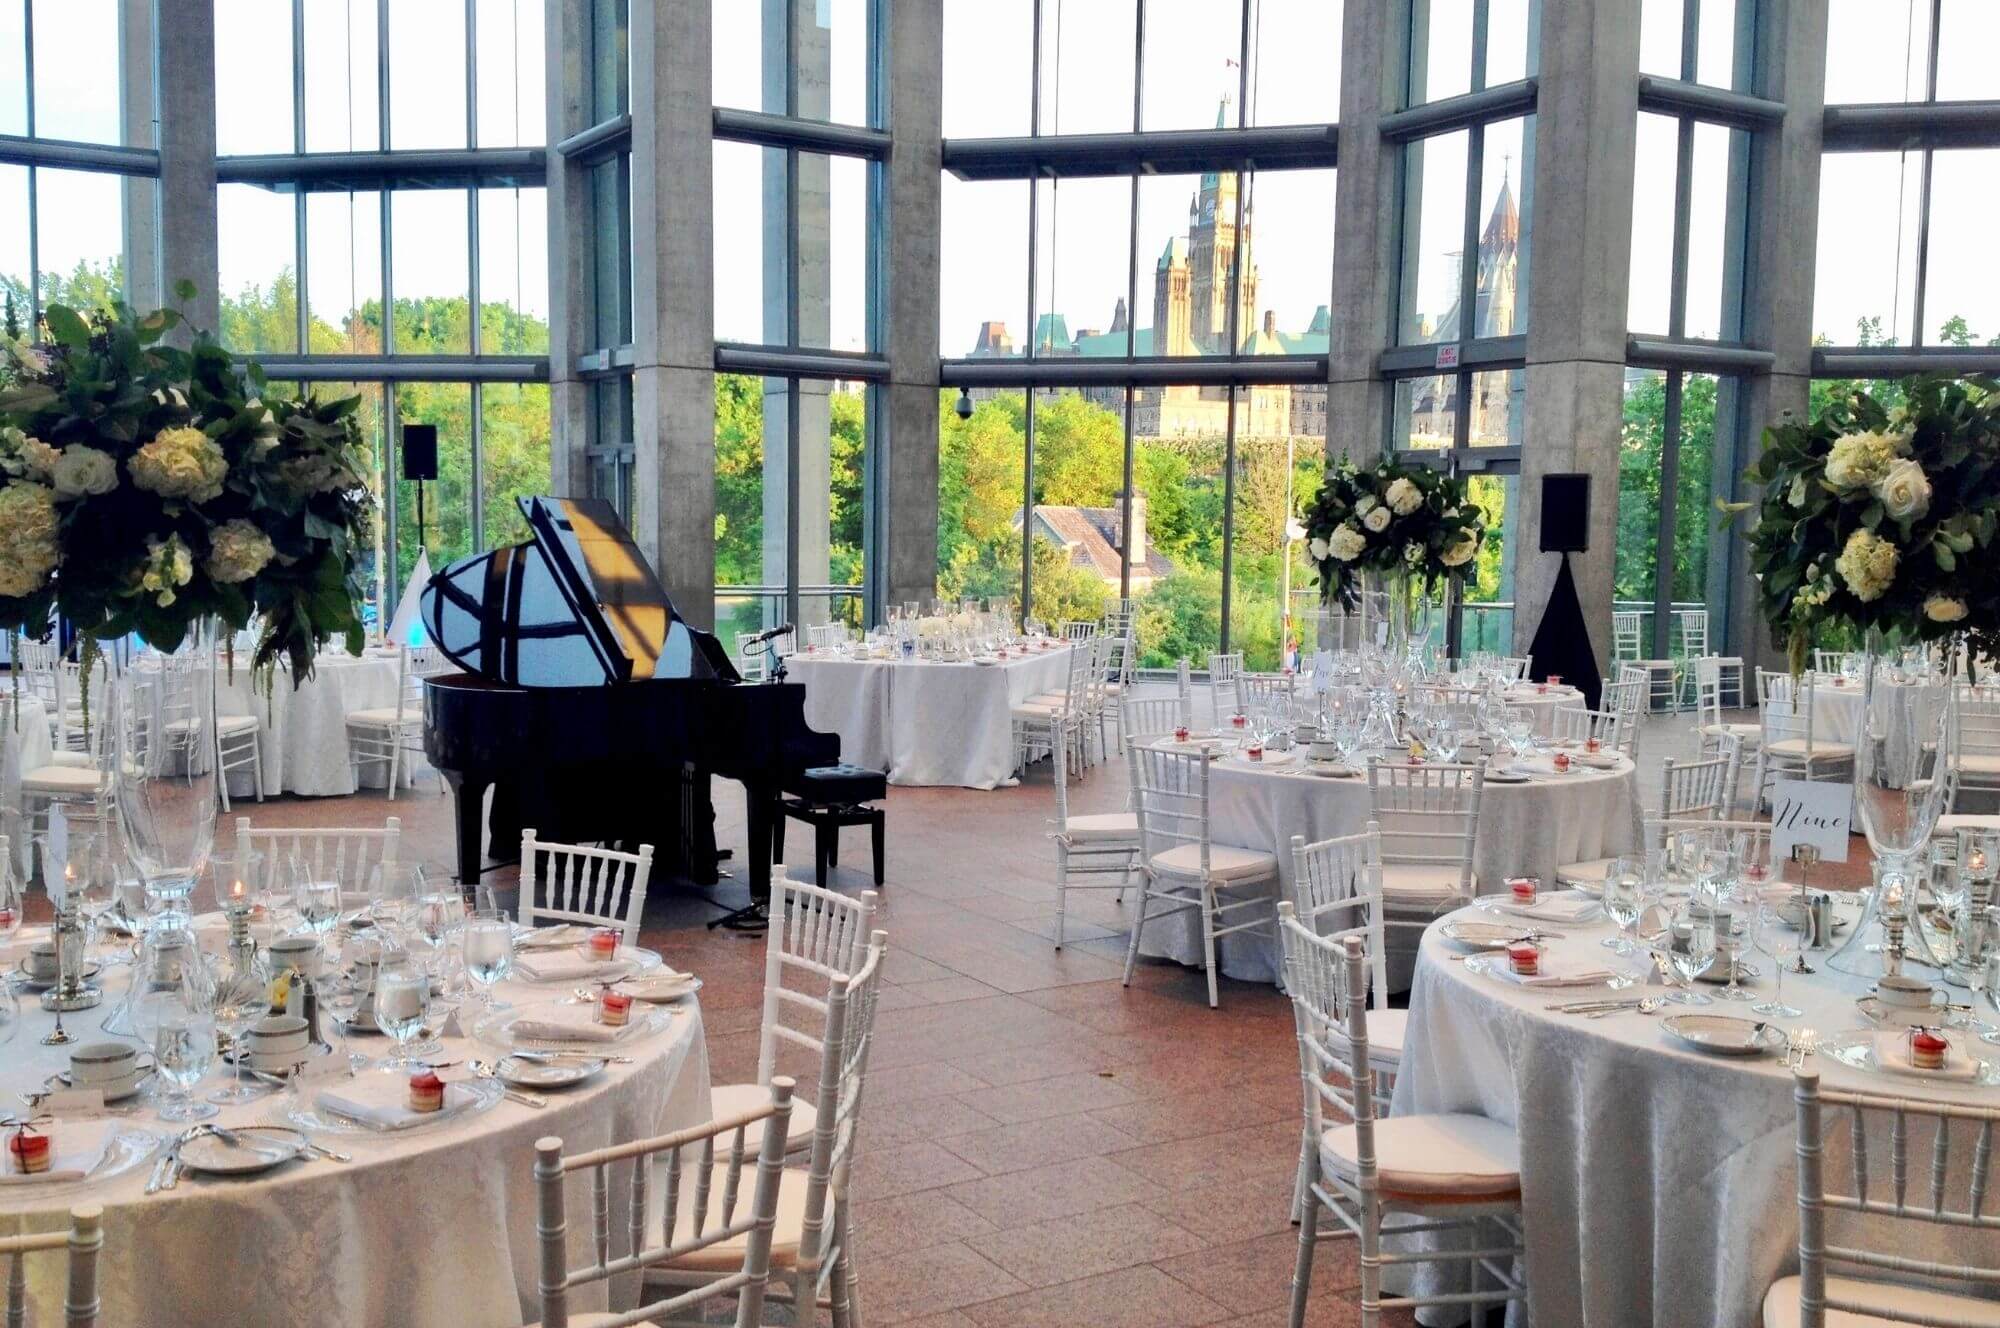 Grand piano at a wedding at the National Gallery of Canada